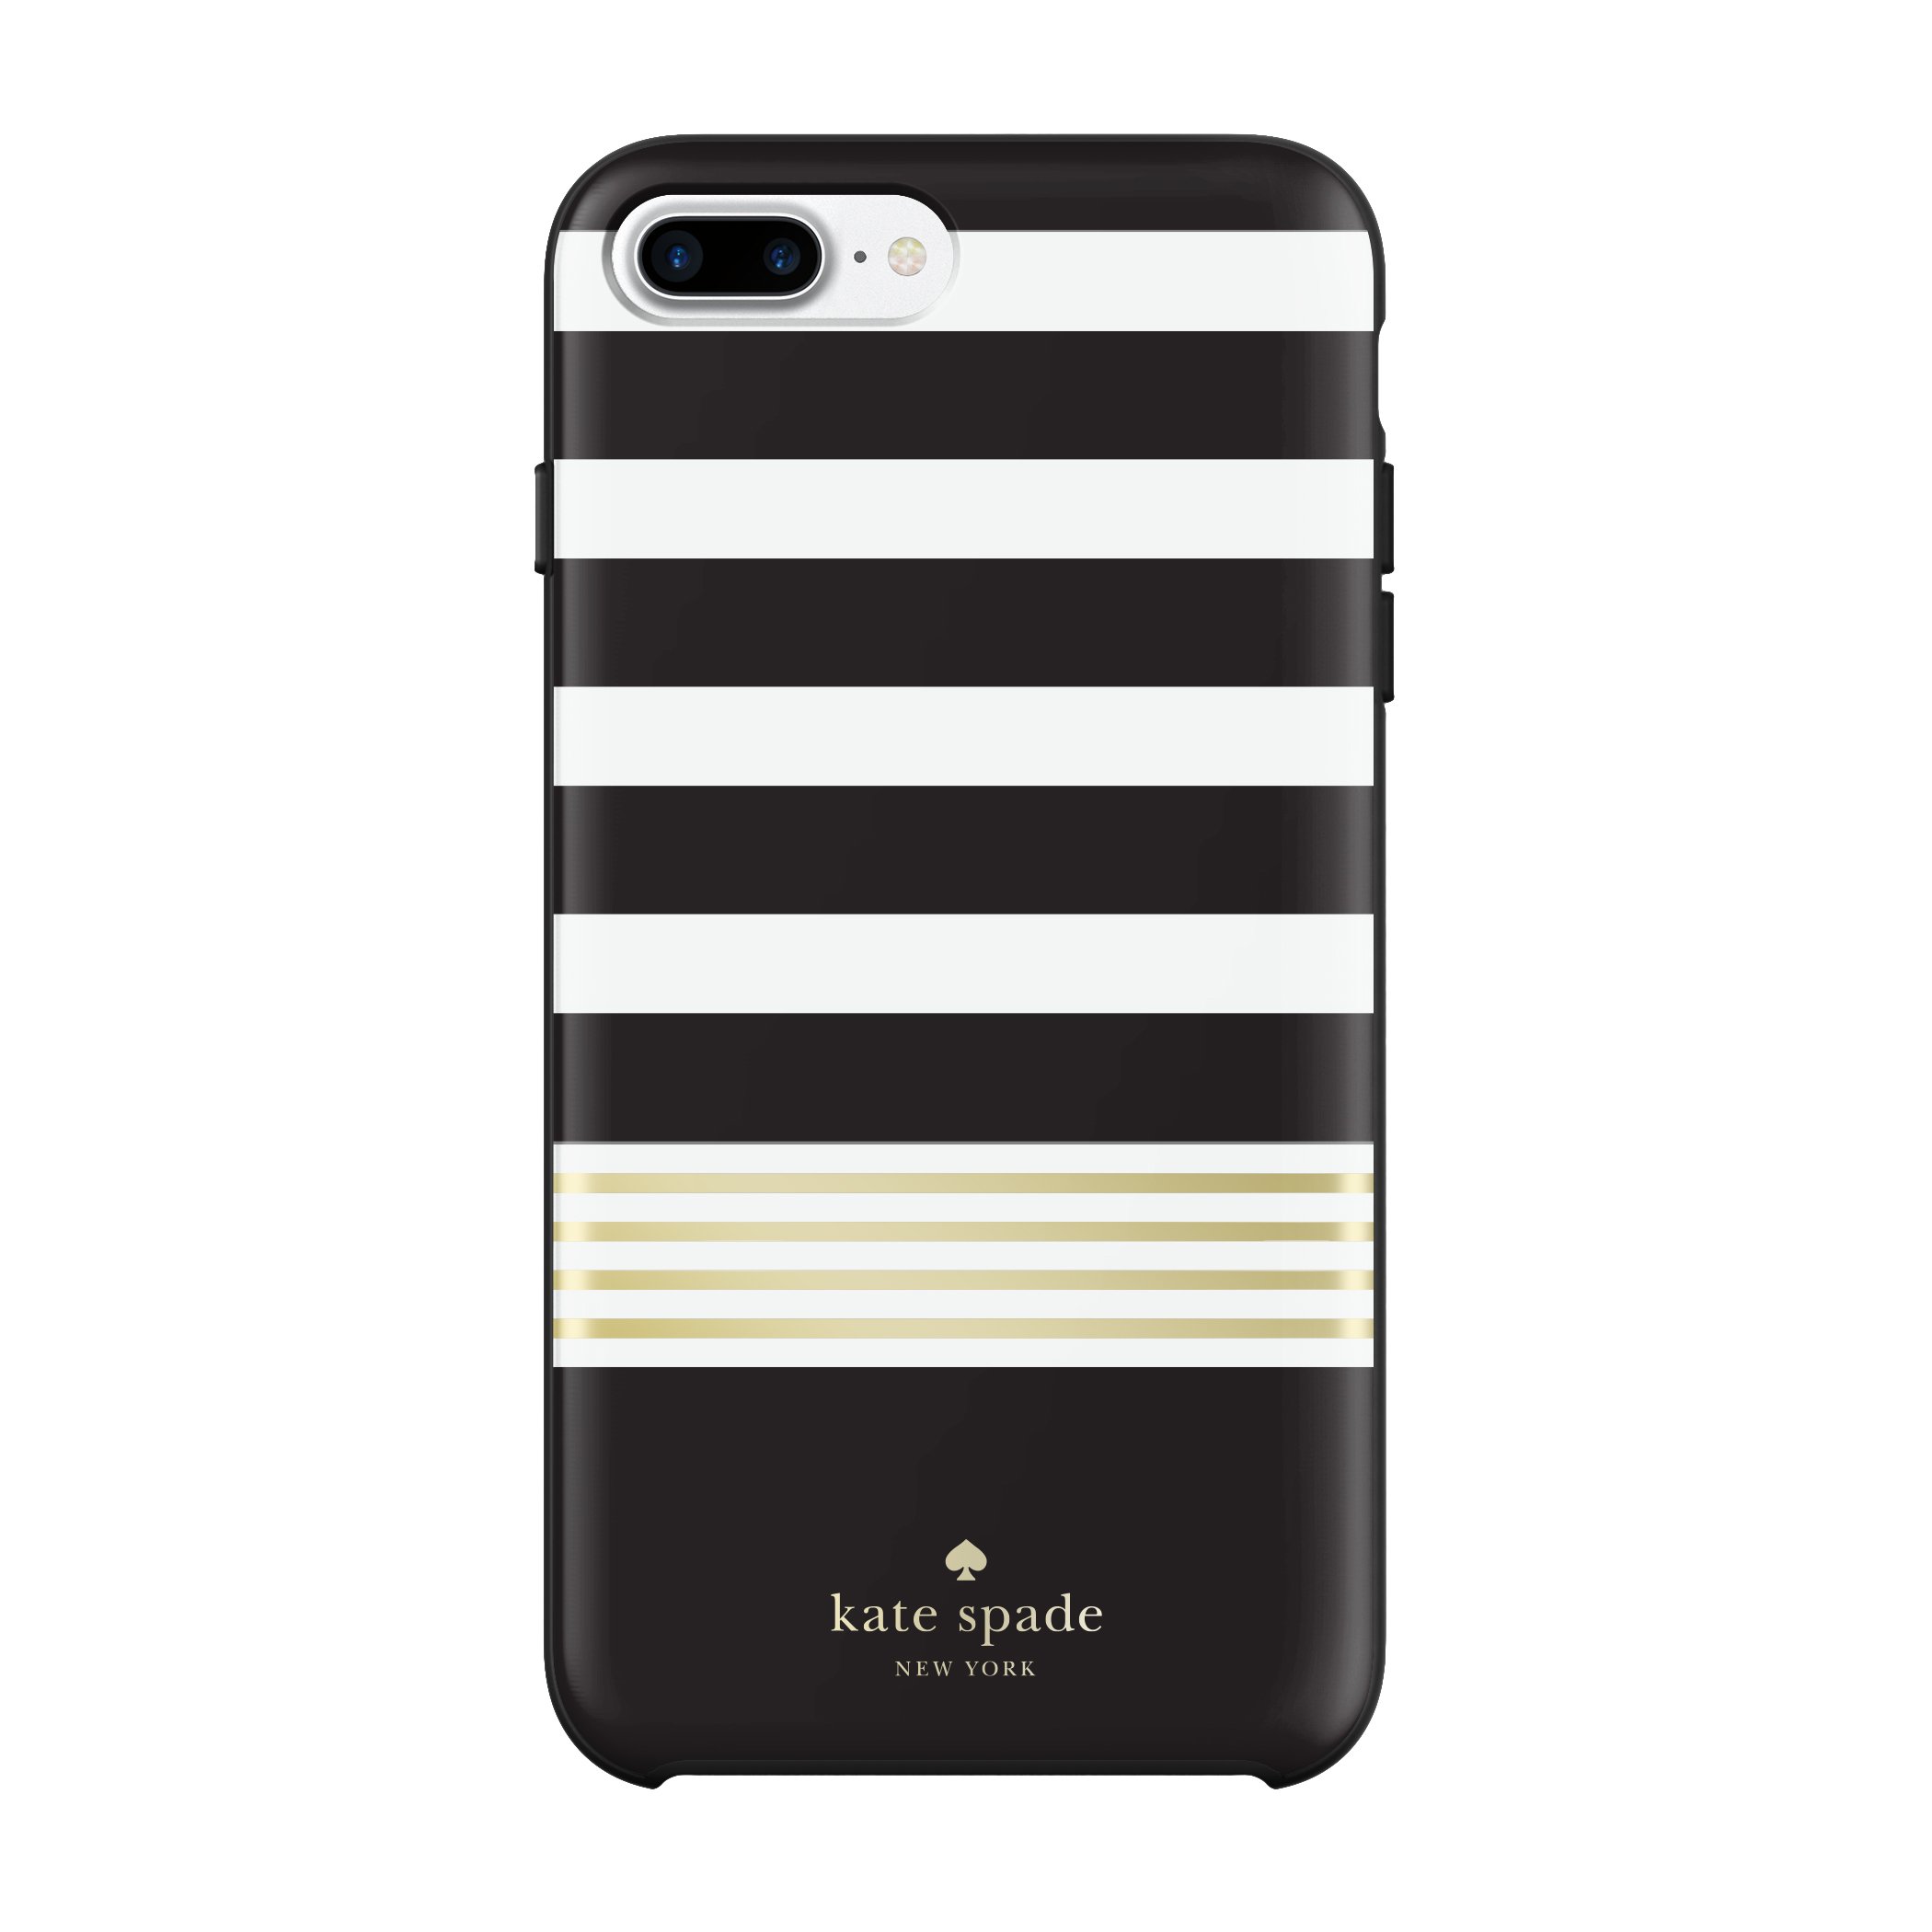 Kate Spade New York Phone Case | for Apple iPhone 8 Plus and iPhone 7